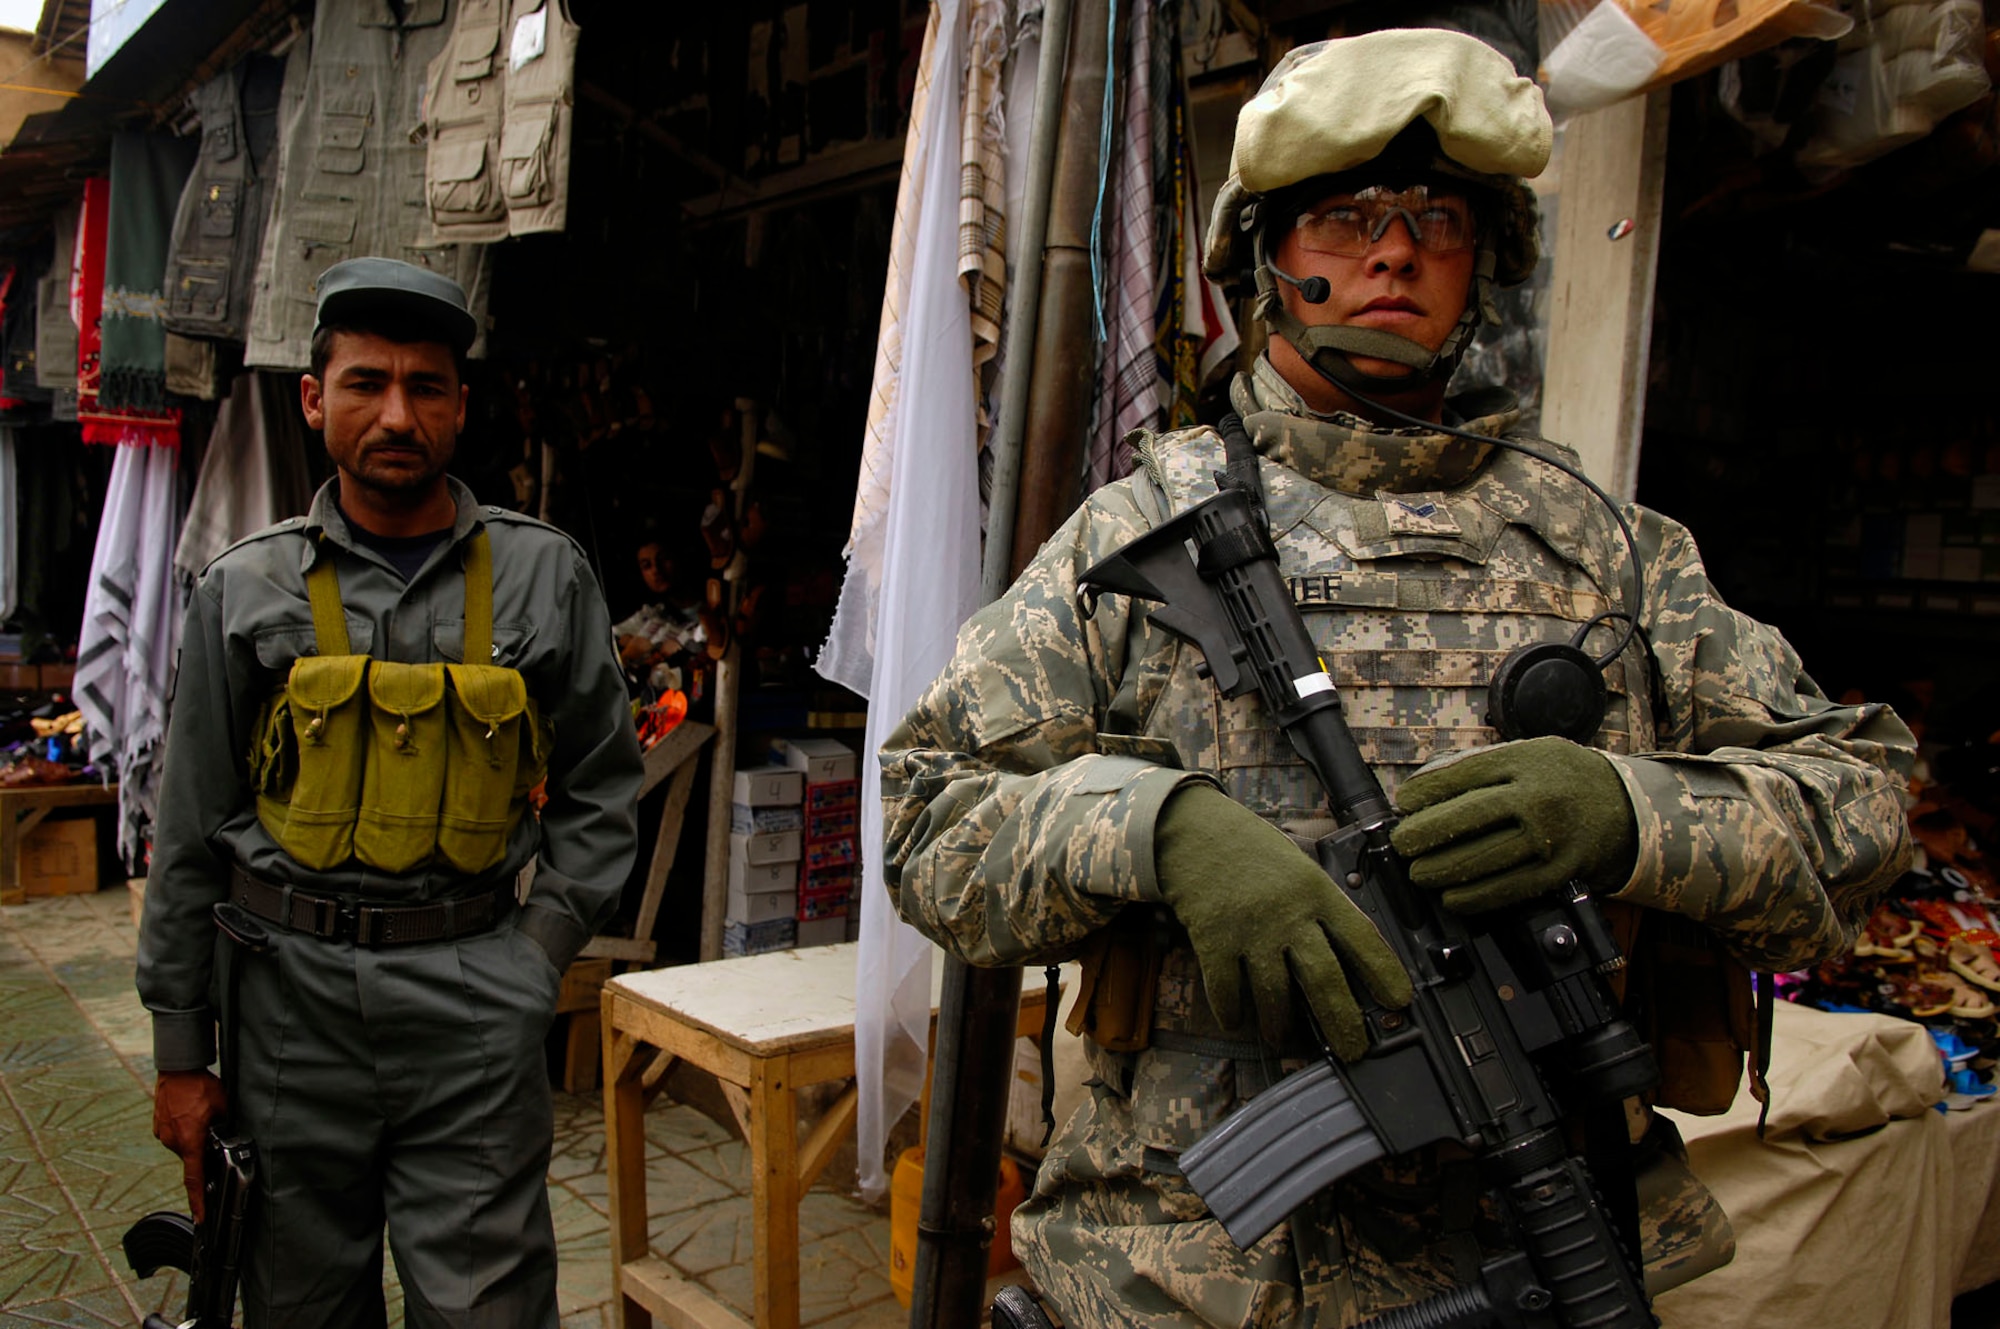 Senior Airman Andrew Kief, 56th Security Forces Squadron, on a foot patrol in Charikar, Afghanistan in April 2008. Kief is a member of the Police Advisory Team, Provincial Reconstruction Team. (U.S. Air Force photo)